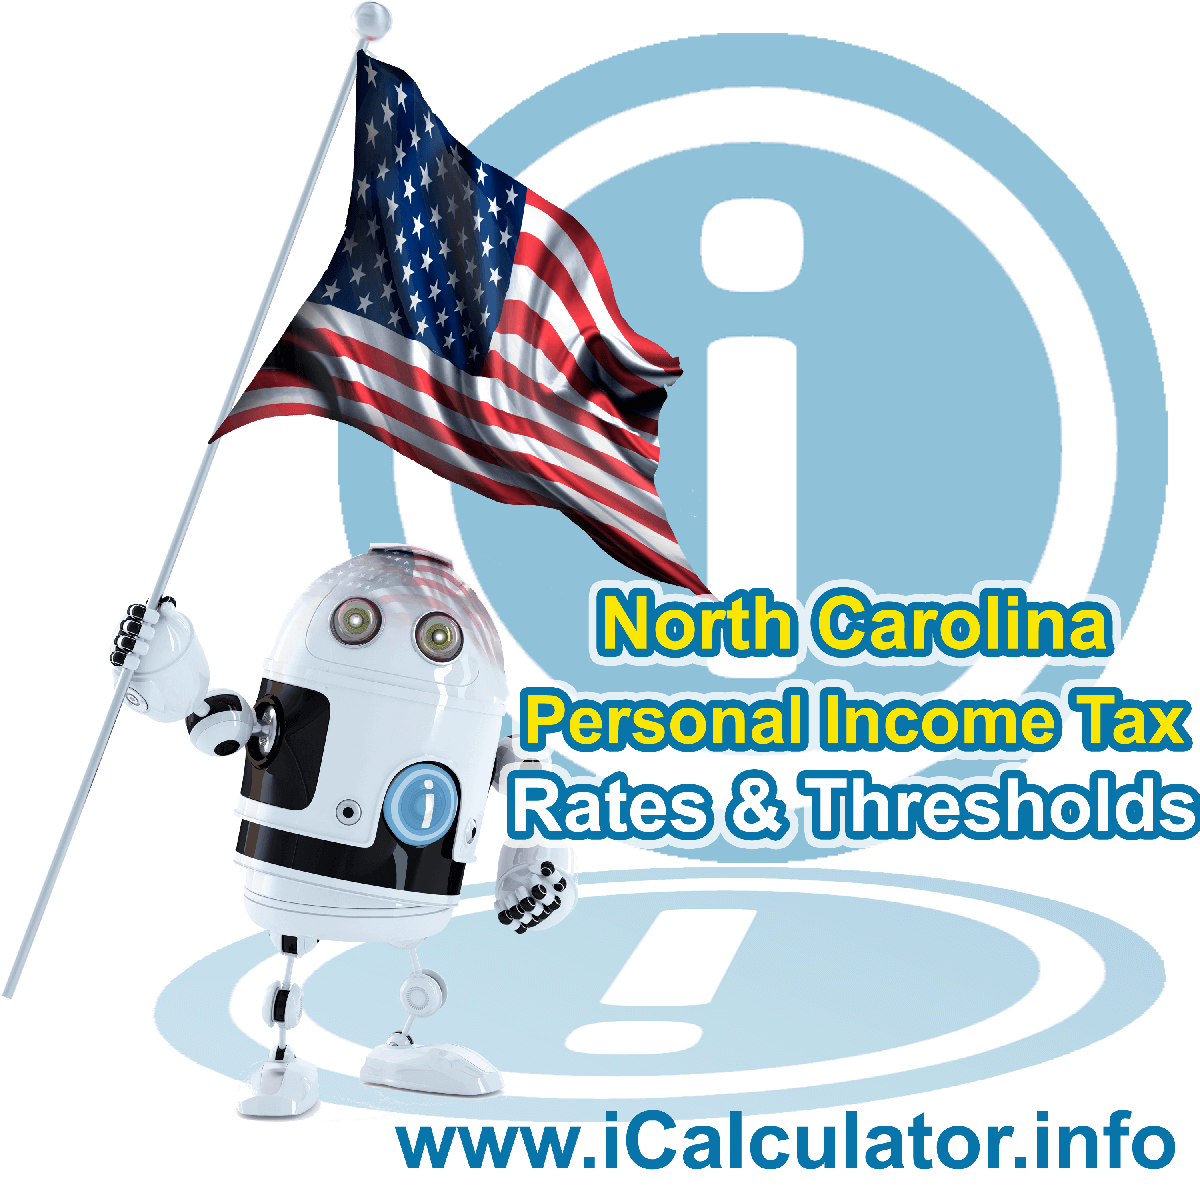 North Carolina State Tax Tables 2013. This image displays details of the North Carolina State Tax Tables for the 2013 tax return year which is provided in support of the 2013 US Tax Calculator